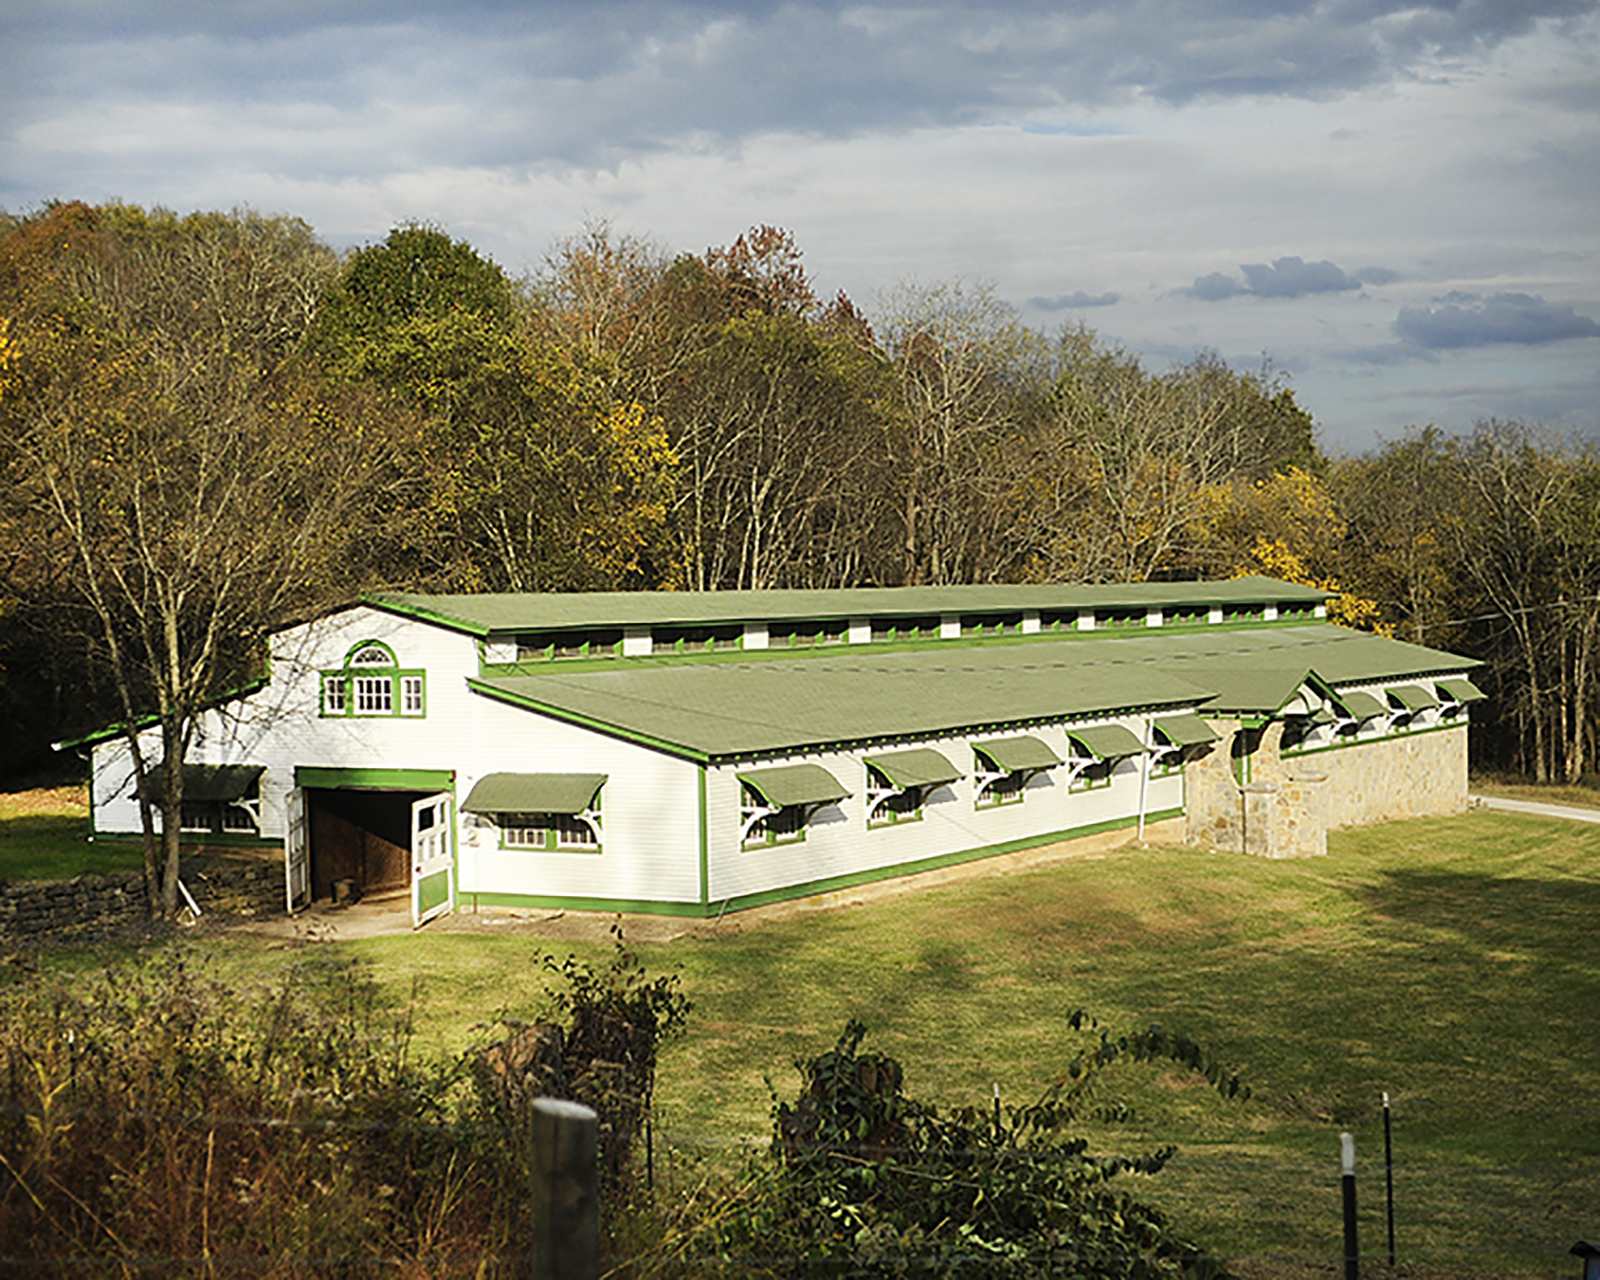 One of the elegant horse barns on the Milky Way Farms in Giles County TN, white walls with a green roof and green window trimming.